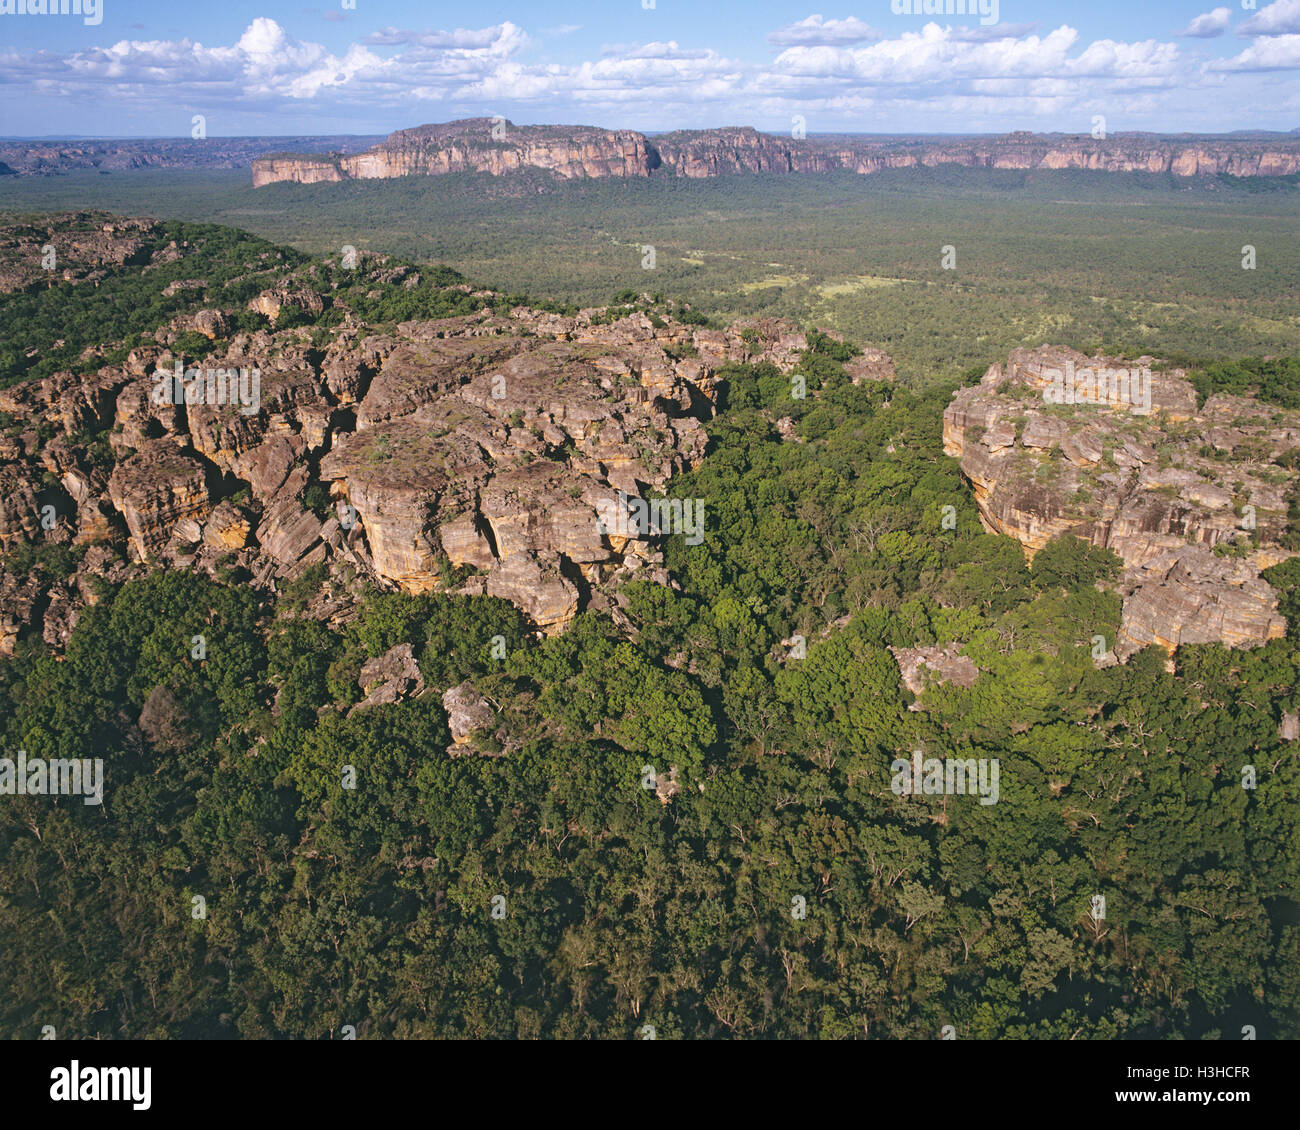 Pockets of monsoon forest and sandstone Stock Photo